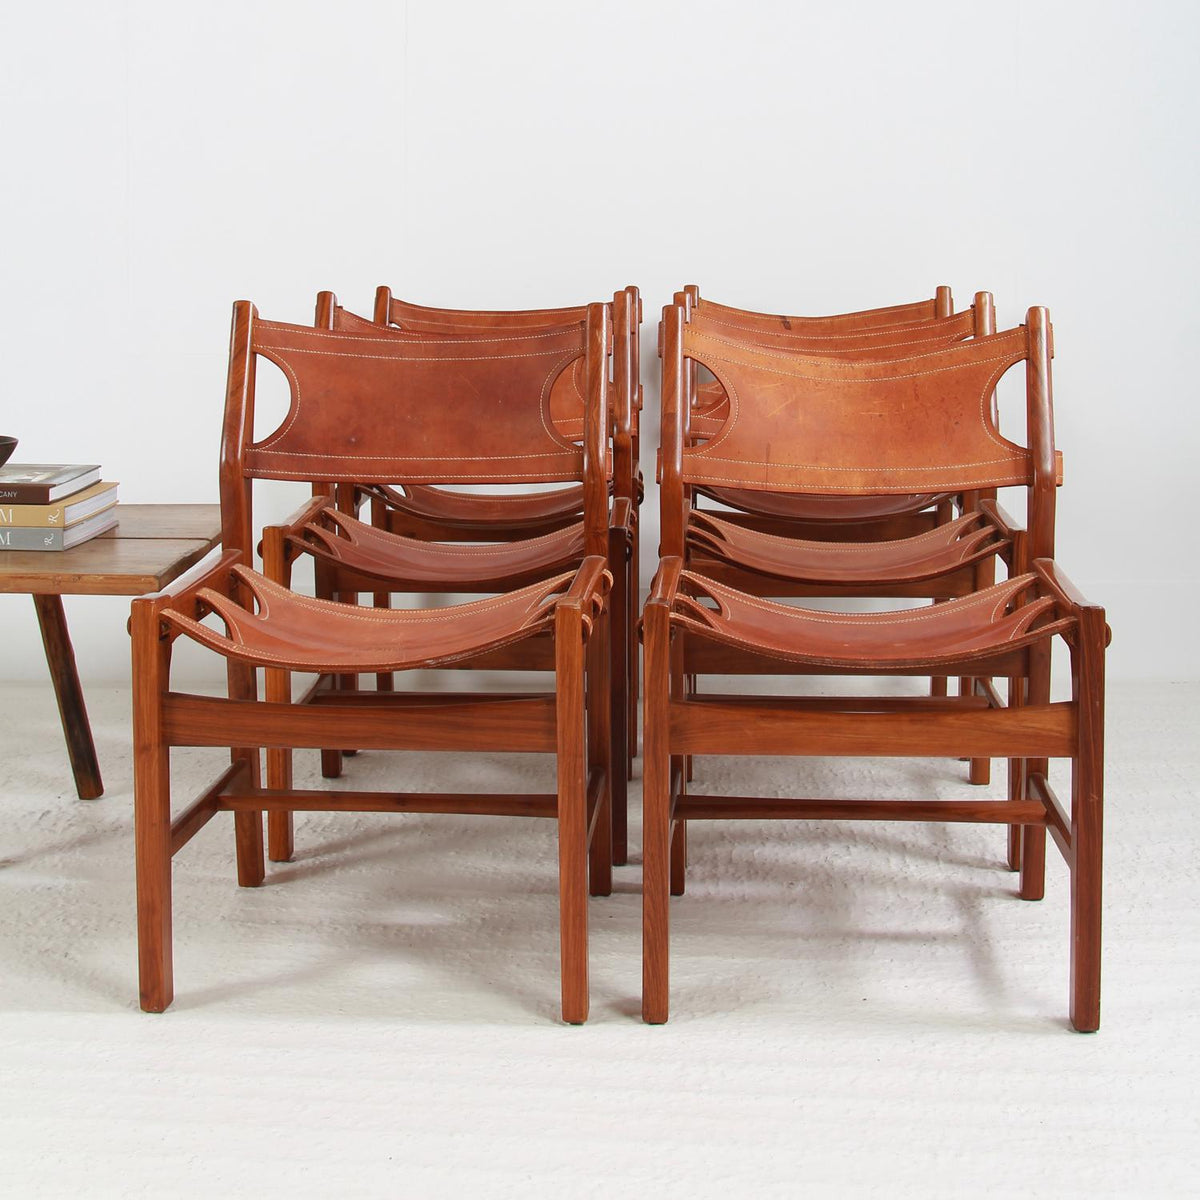 PAIR OF MID CENTURY Designer LEATHER LOUNGE CHAIRS